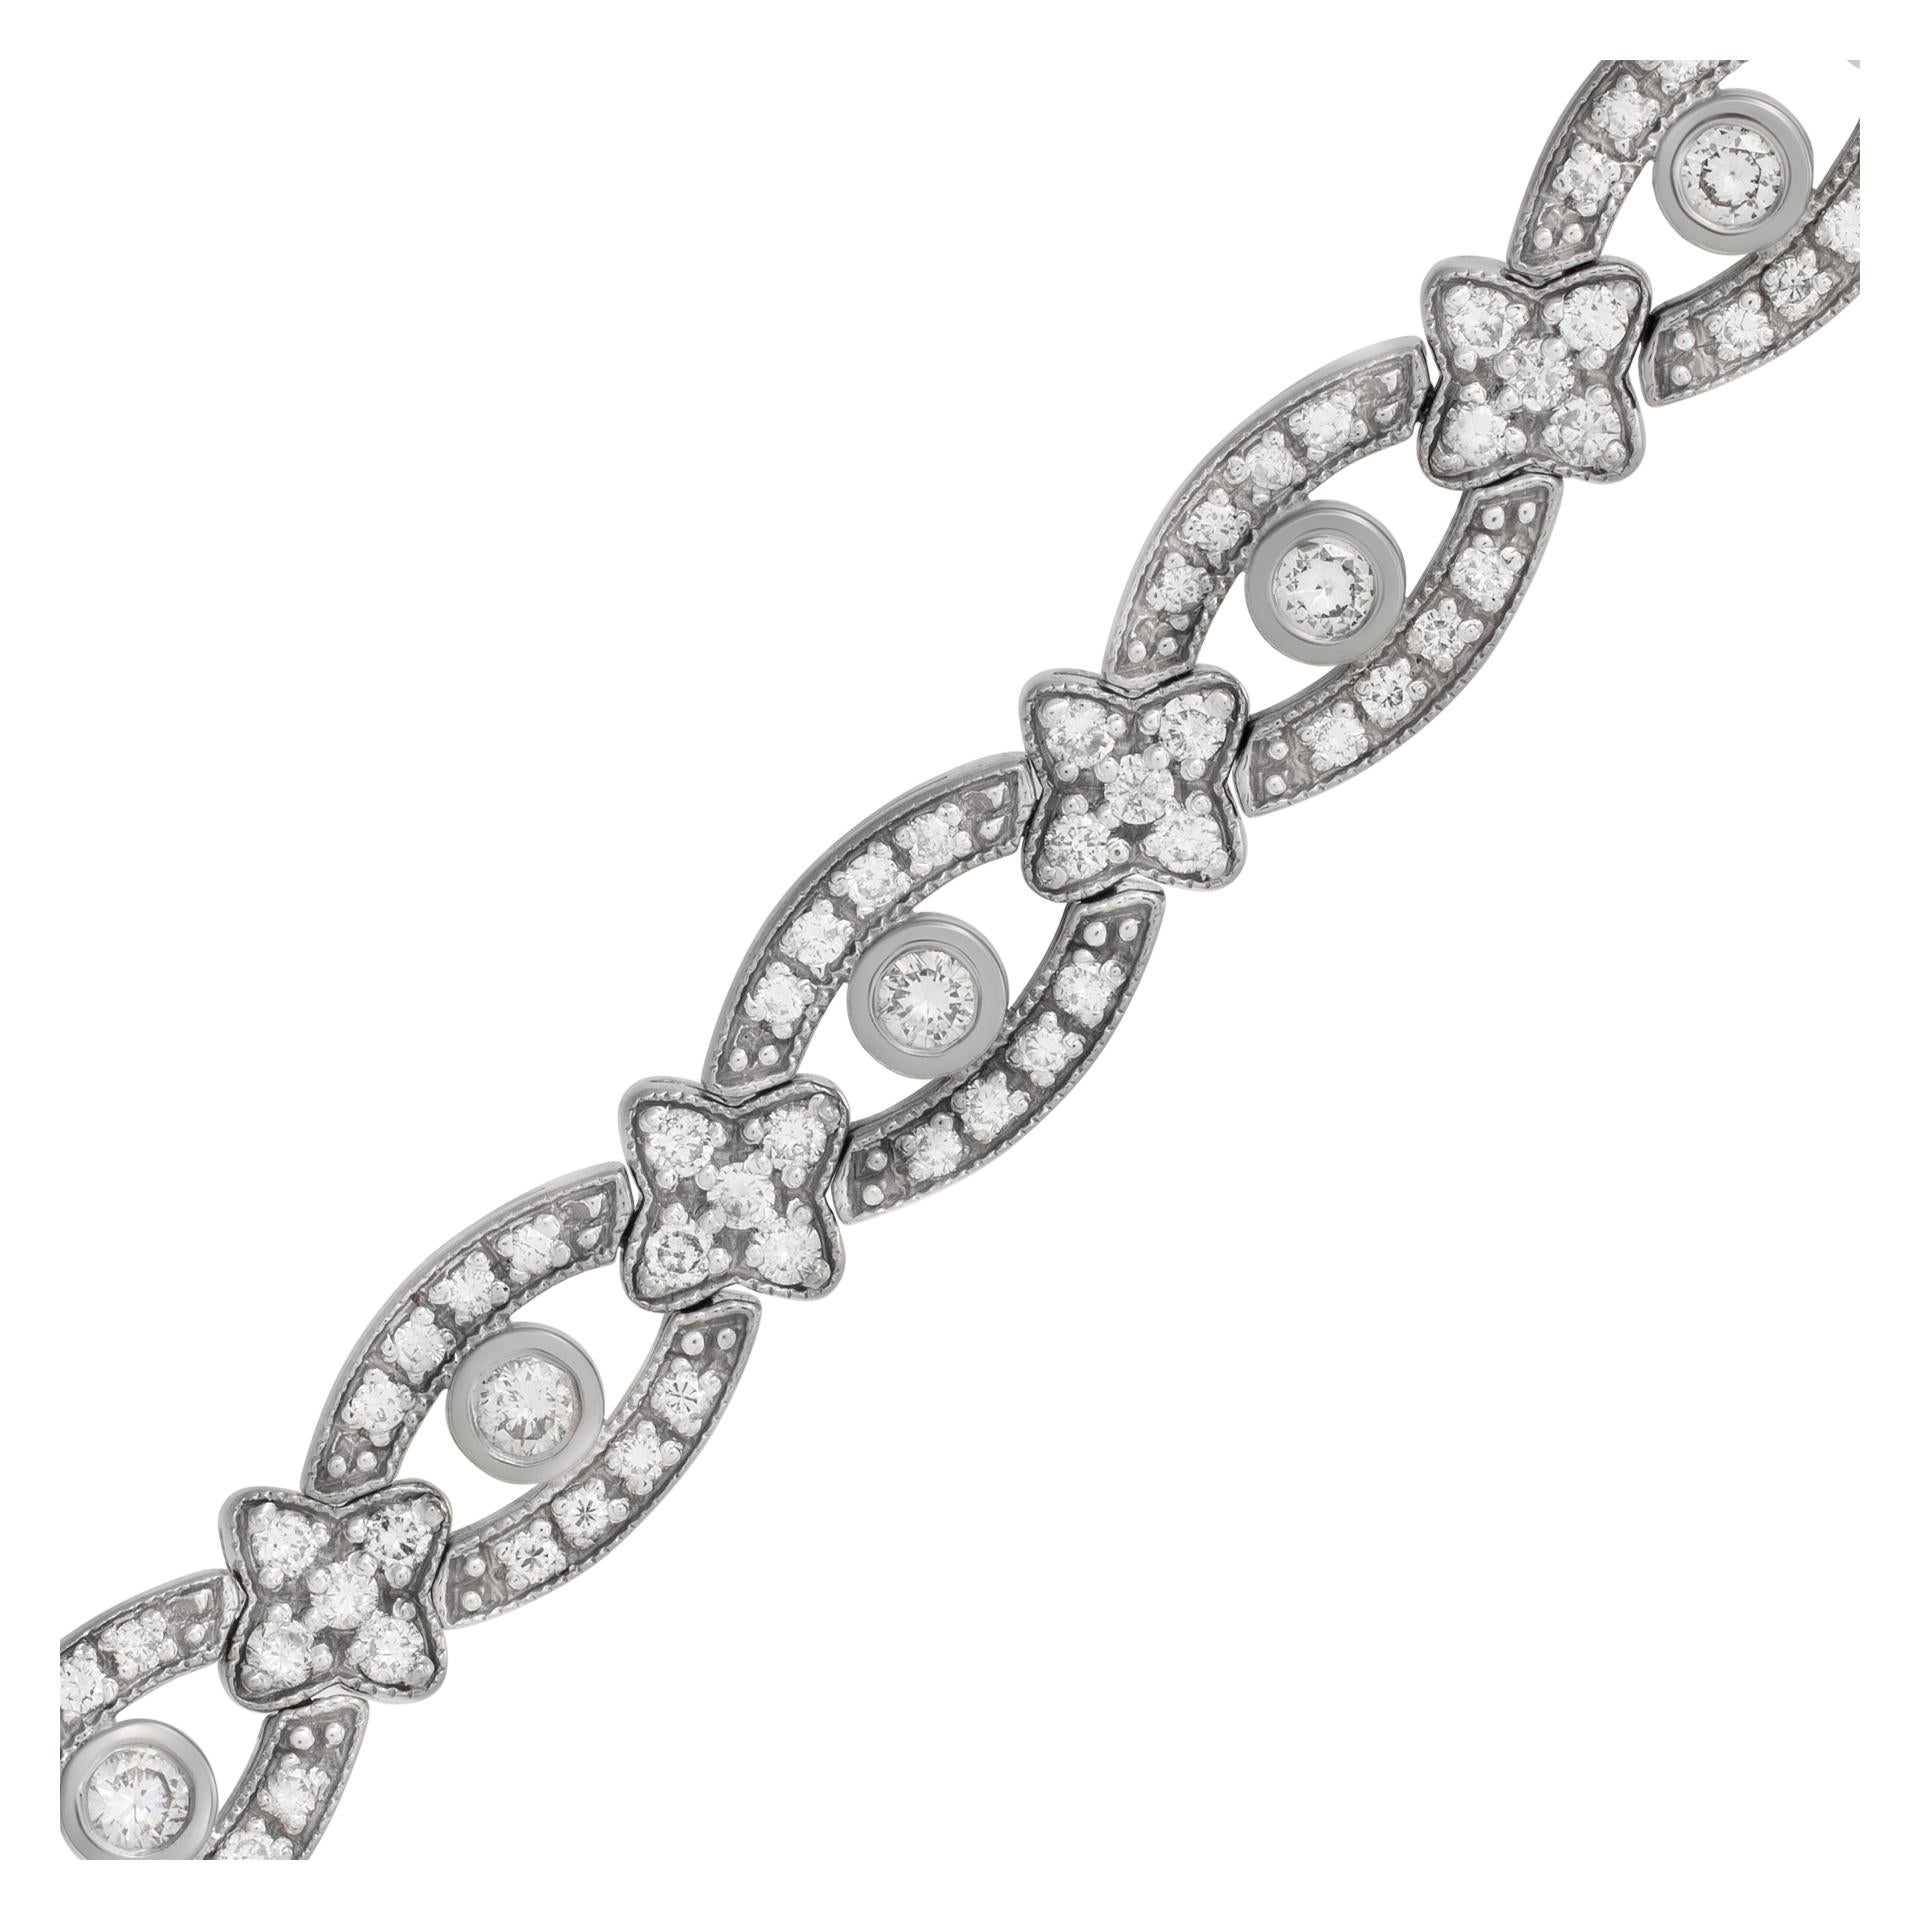 Diamond line bracelet set in 14k white gold. Round brilliant cut diamonds total weight approximately 3 carats, estimate: G-H color, VS-SI clarity. Width: 0.25 inch. Length: 6 3/4